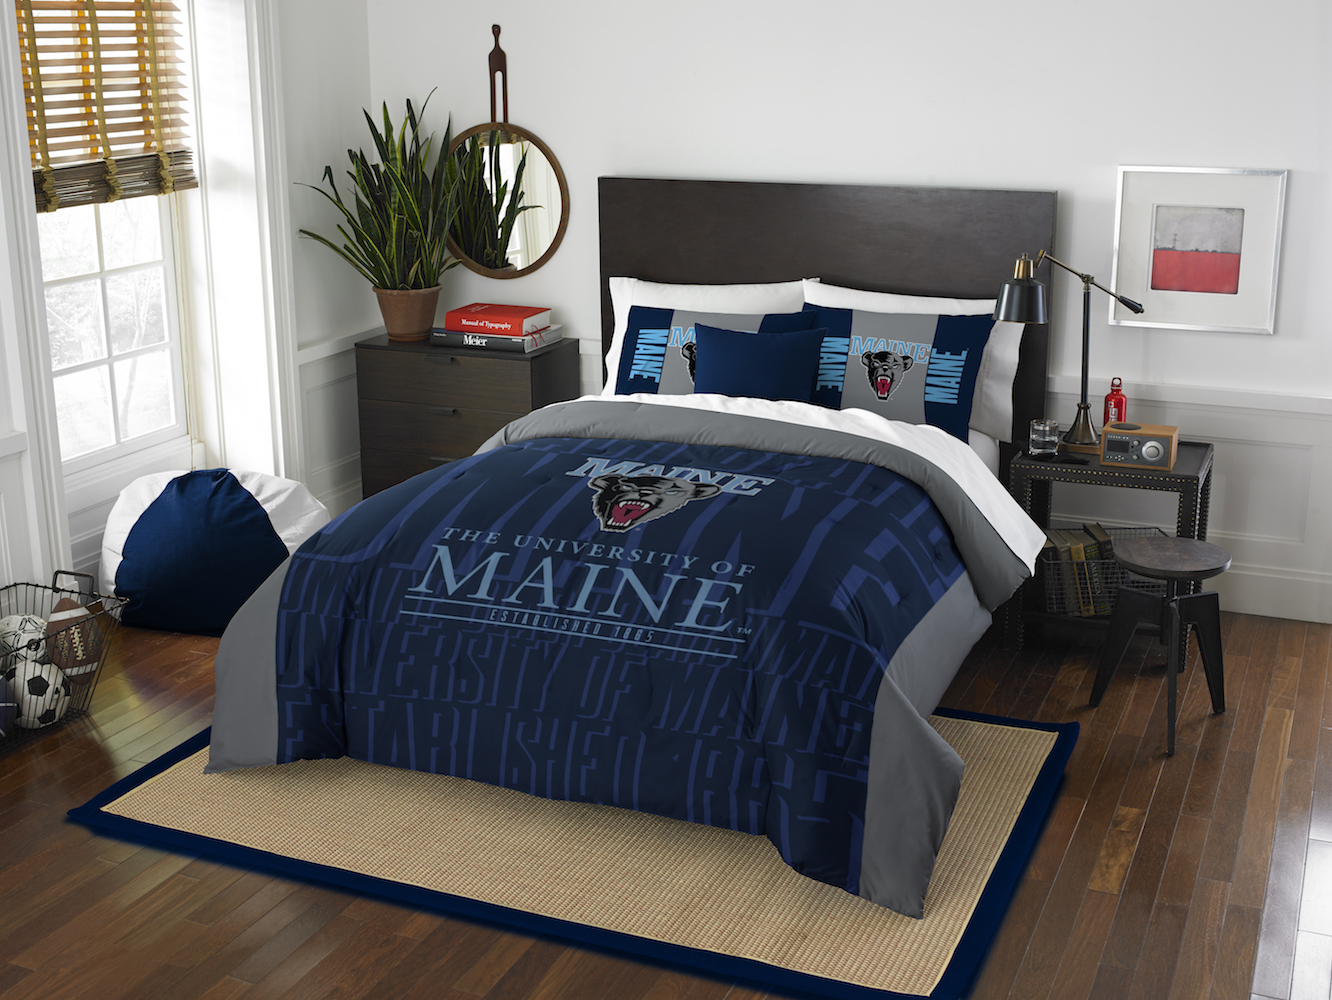 Maine Black Bears QUEEN/FULL size Comforter and 2 Shams